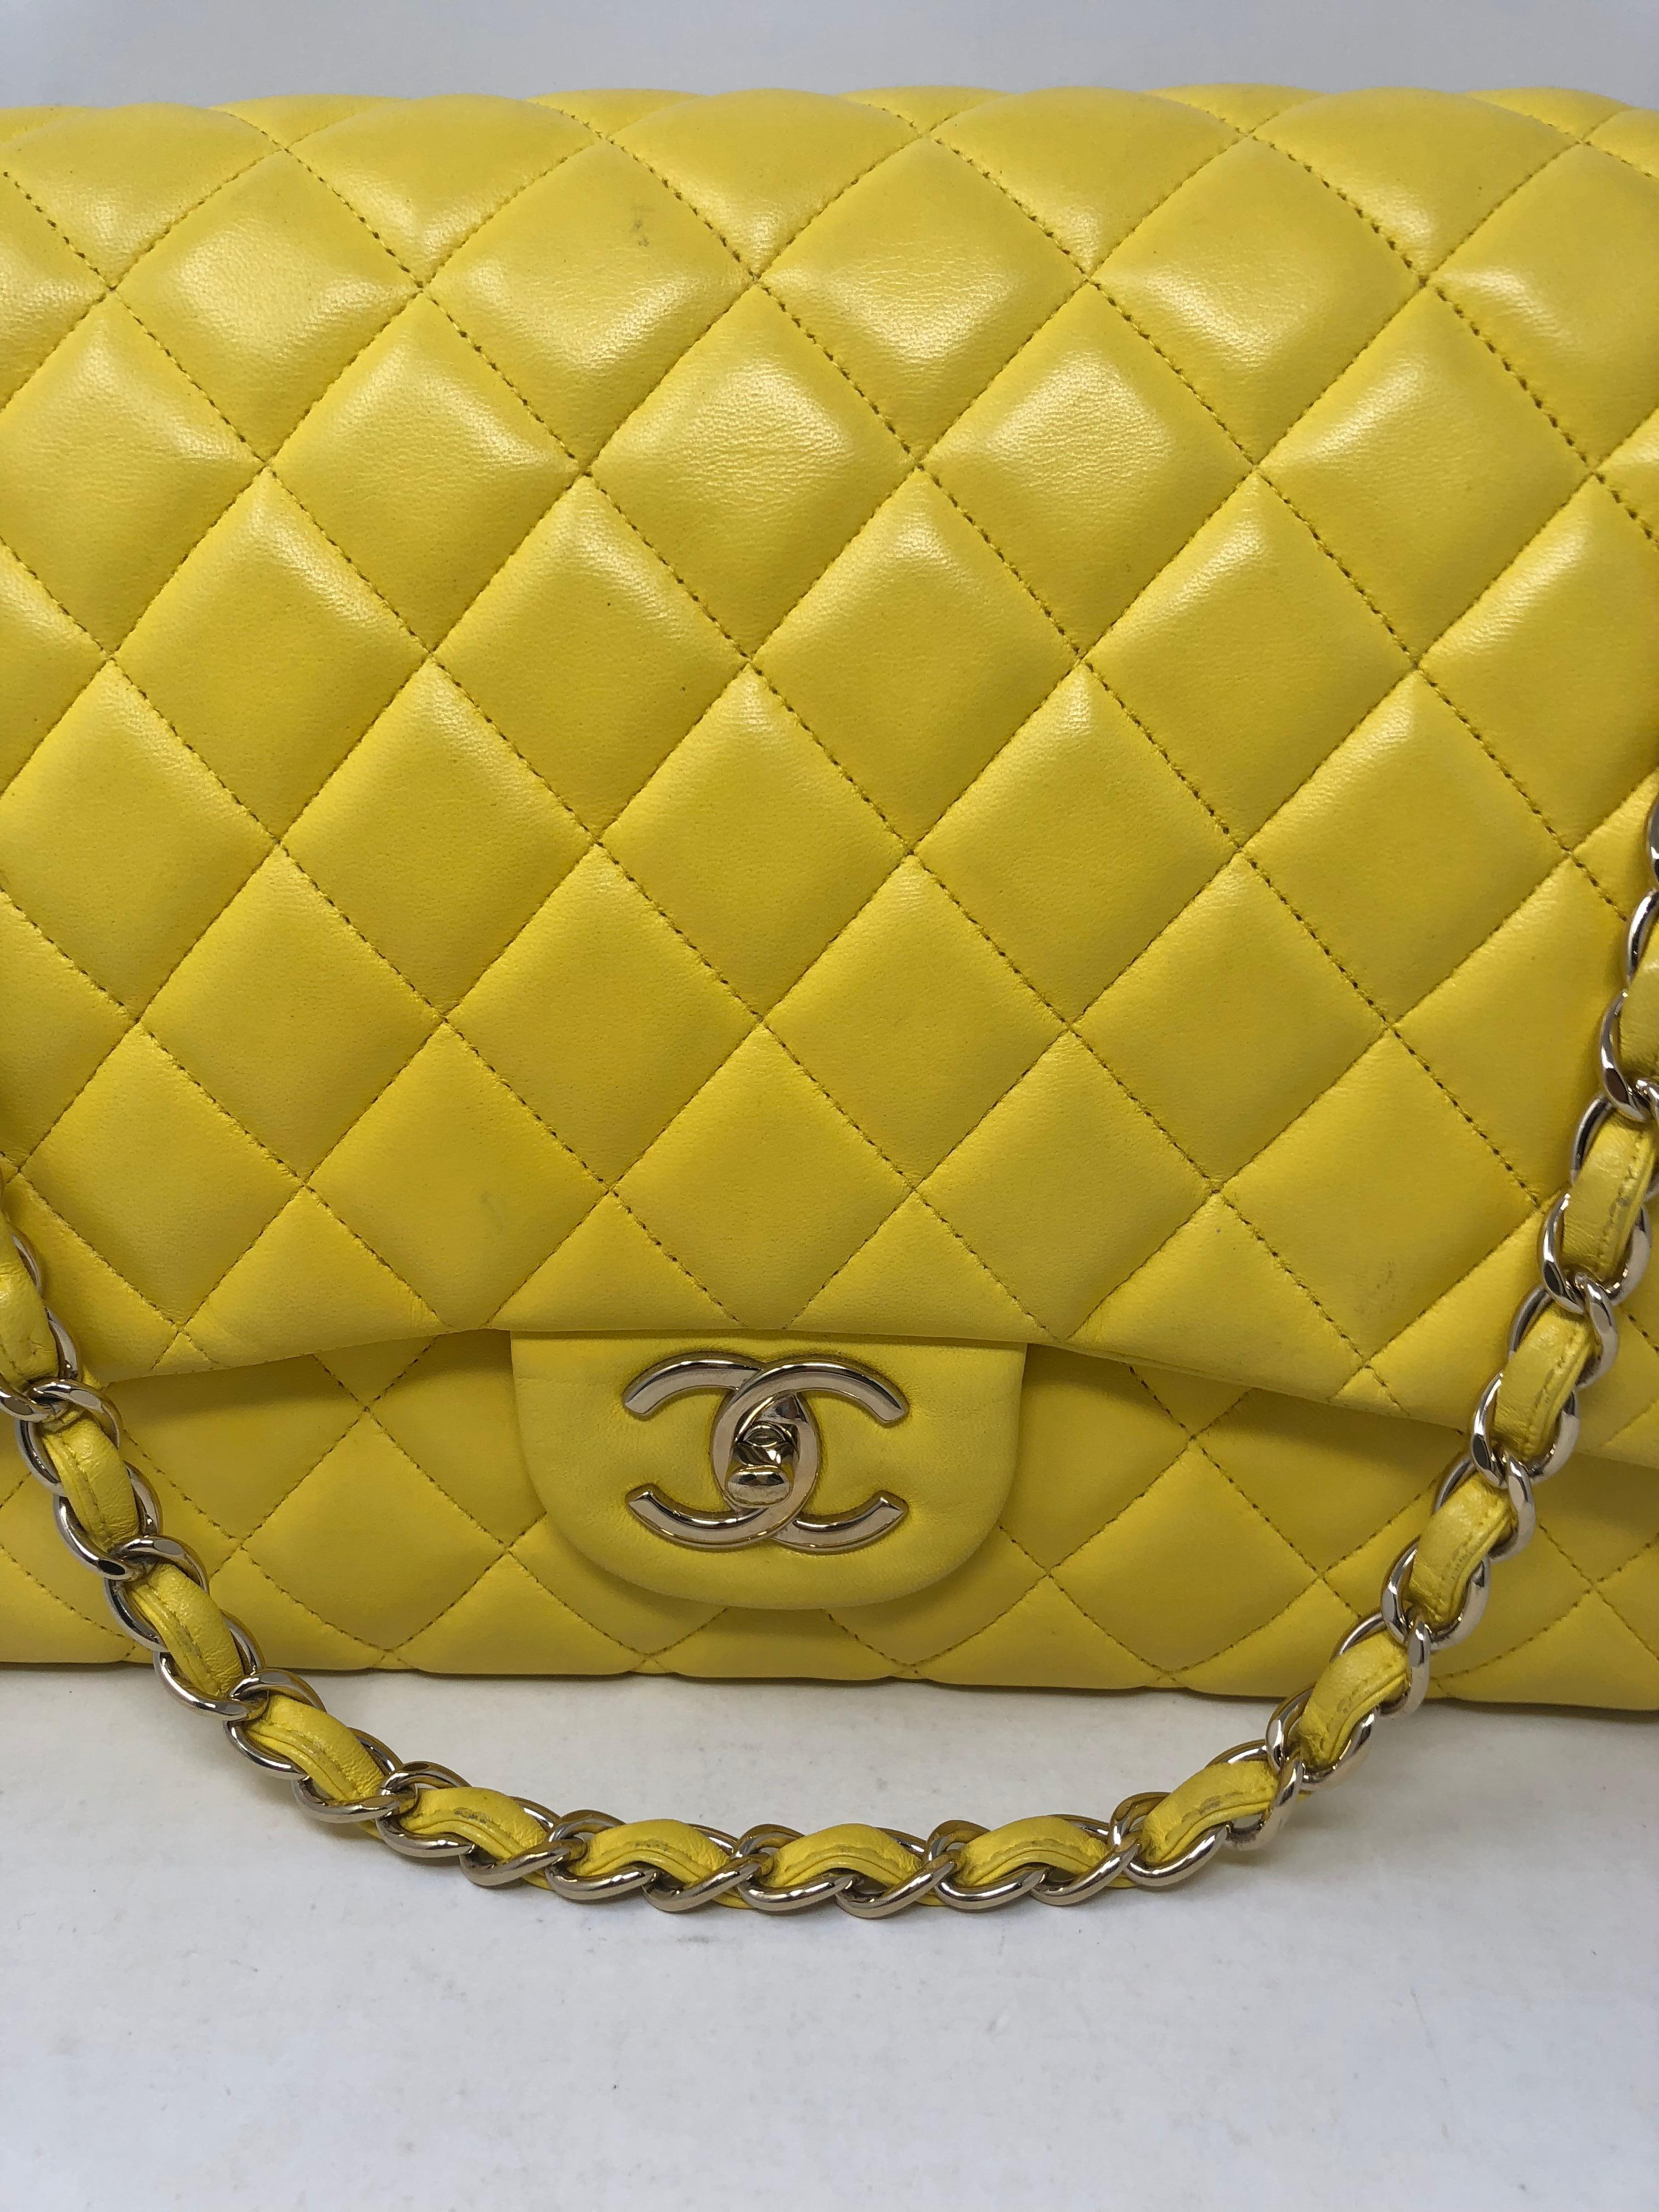 Canary yellow Chanel Double Flap Bag in lambskin leather. Maxi size over 13